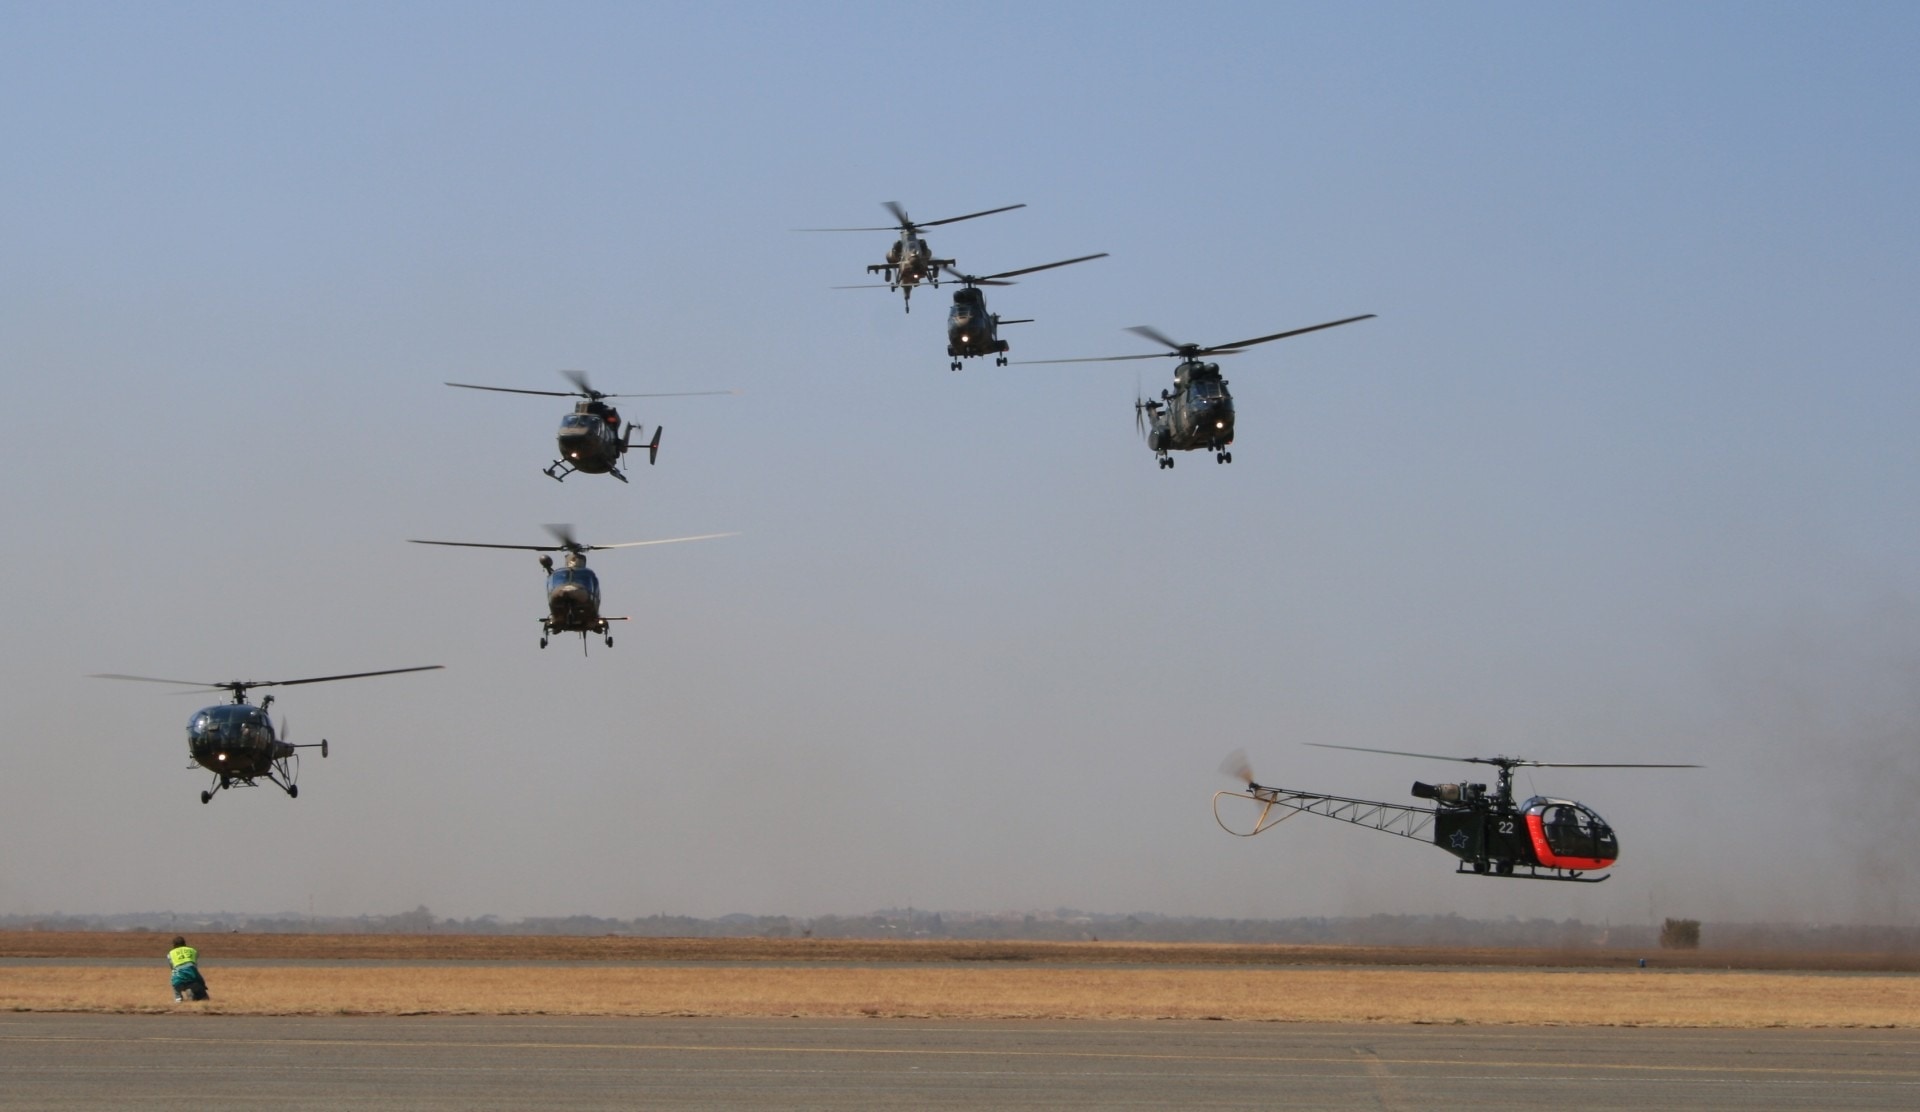 7 helicopters